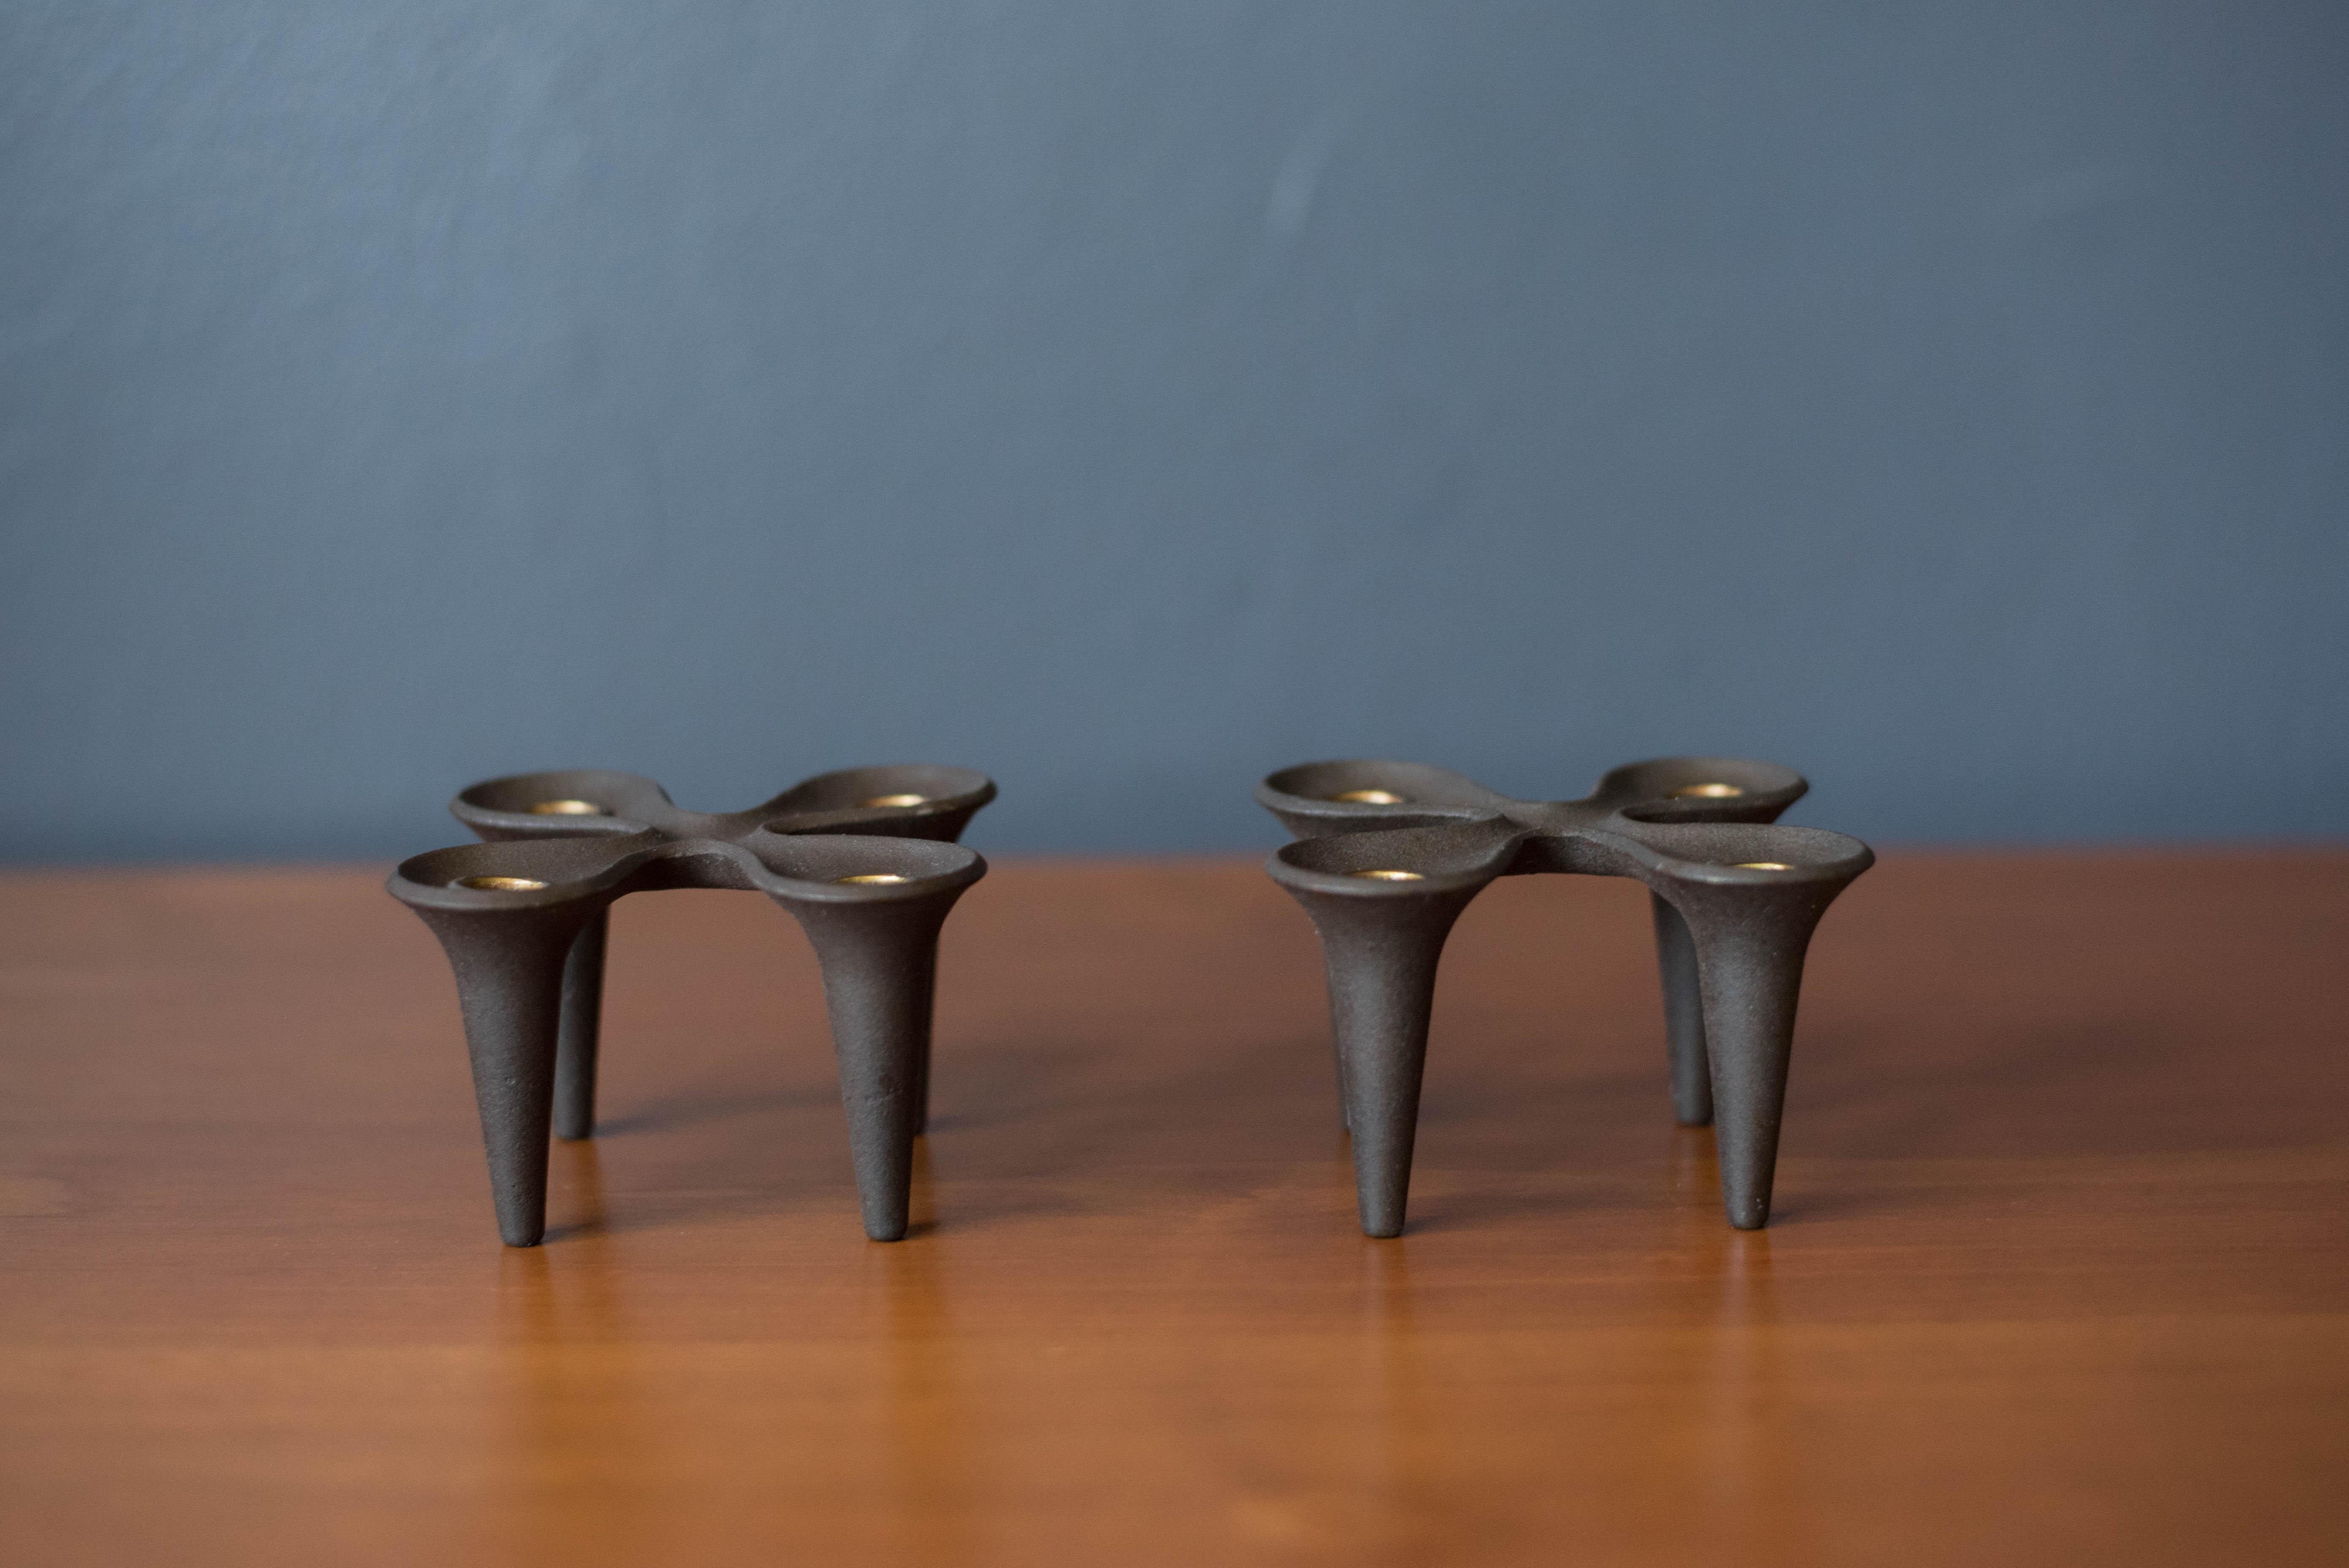 Vintage pair of black candleholders by Jens H. Quistgaard for Dansk Designs, Denmark. This set is made of heavy cast iron with brass inserts for taper candles. Price is for the pair.



Offered by Mid Century Maddist